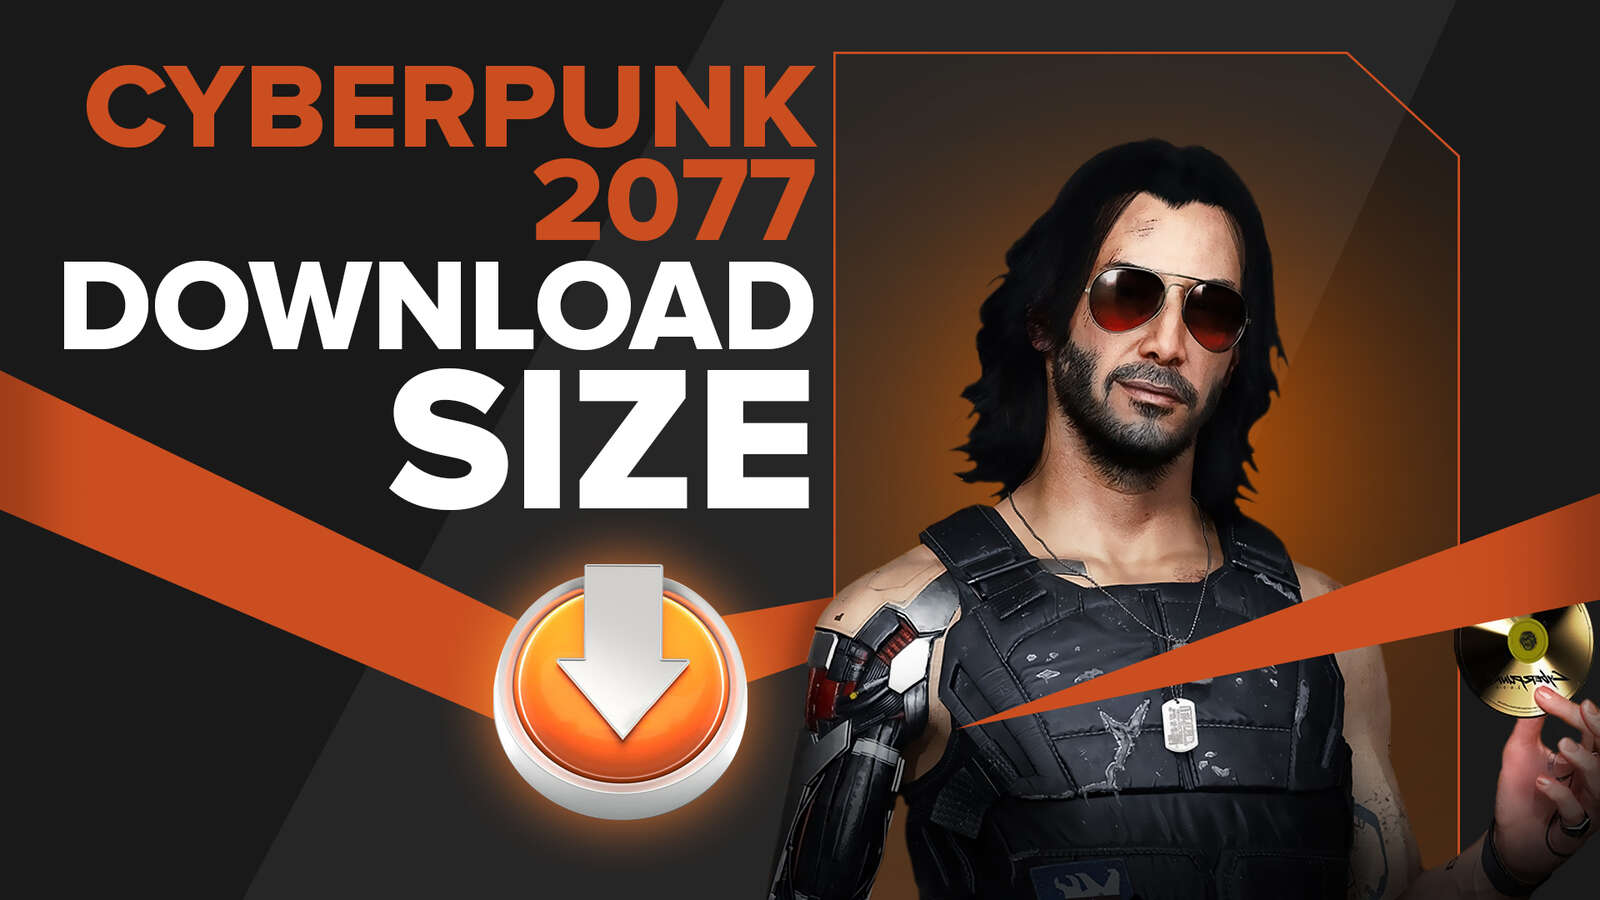 What Is The Download Size Of Cyberpunk 2077? [Recent Update]